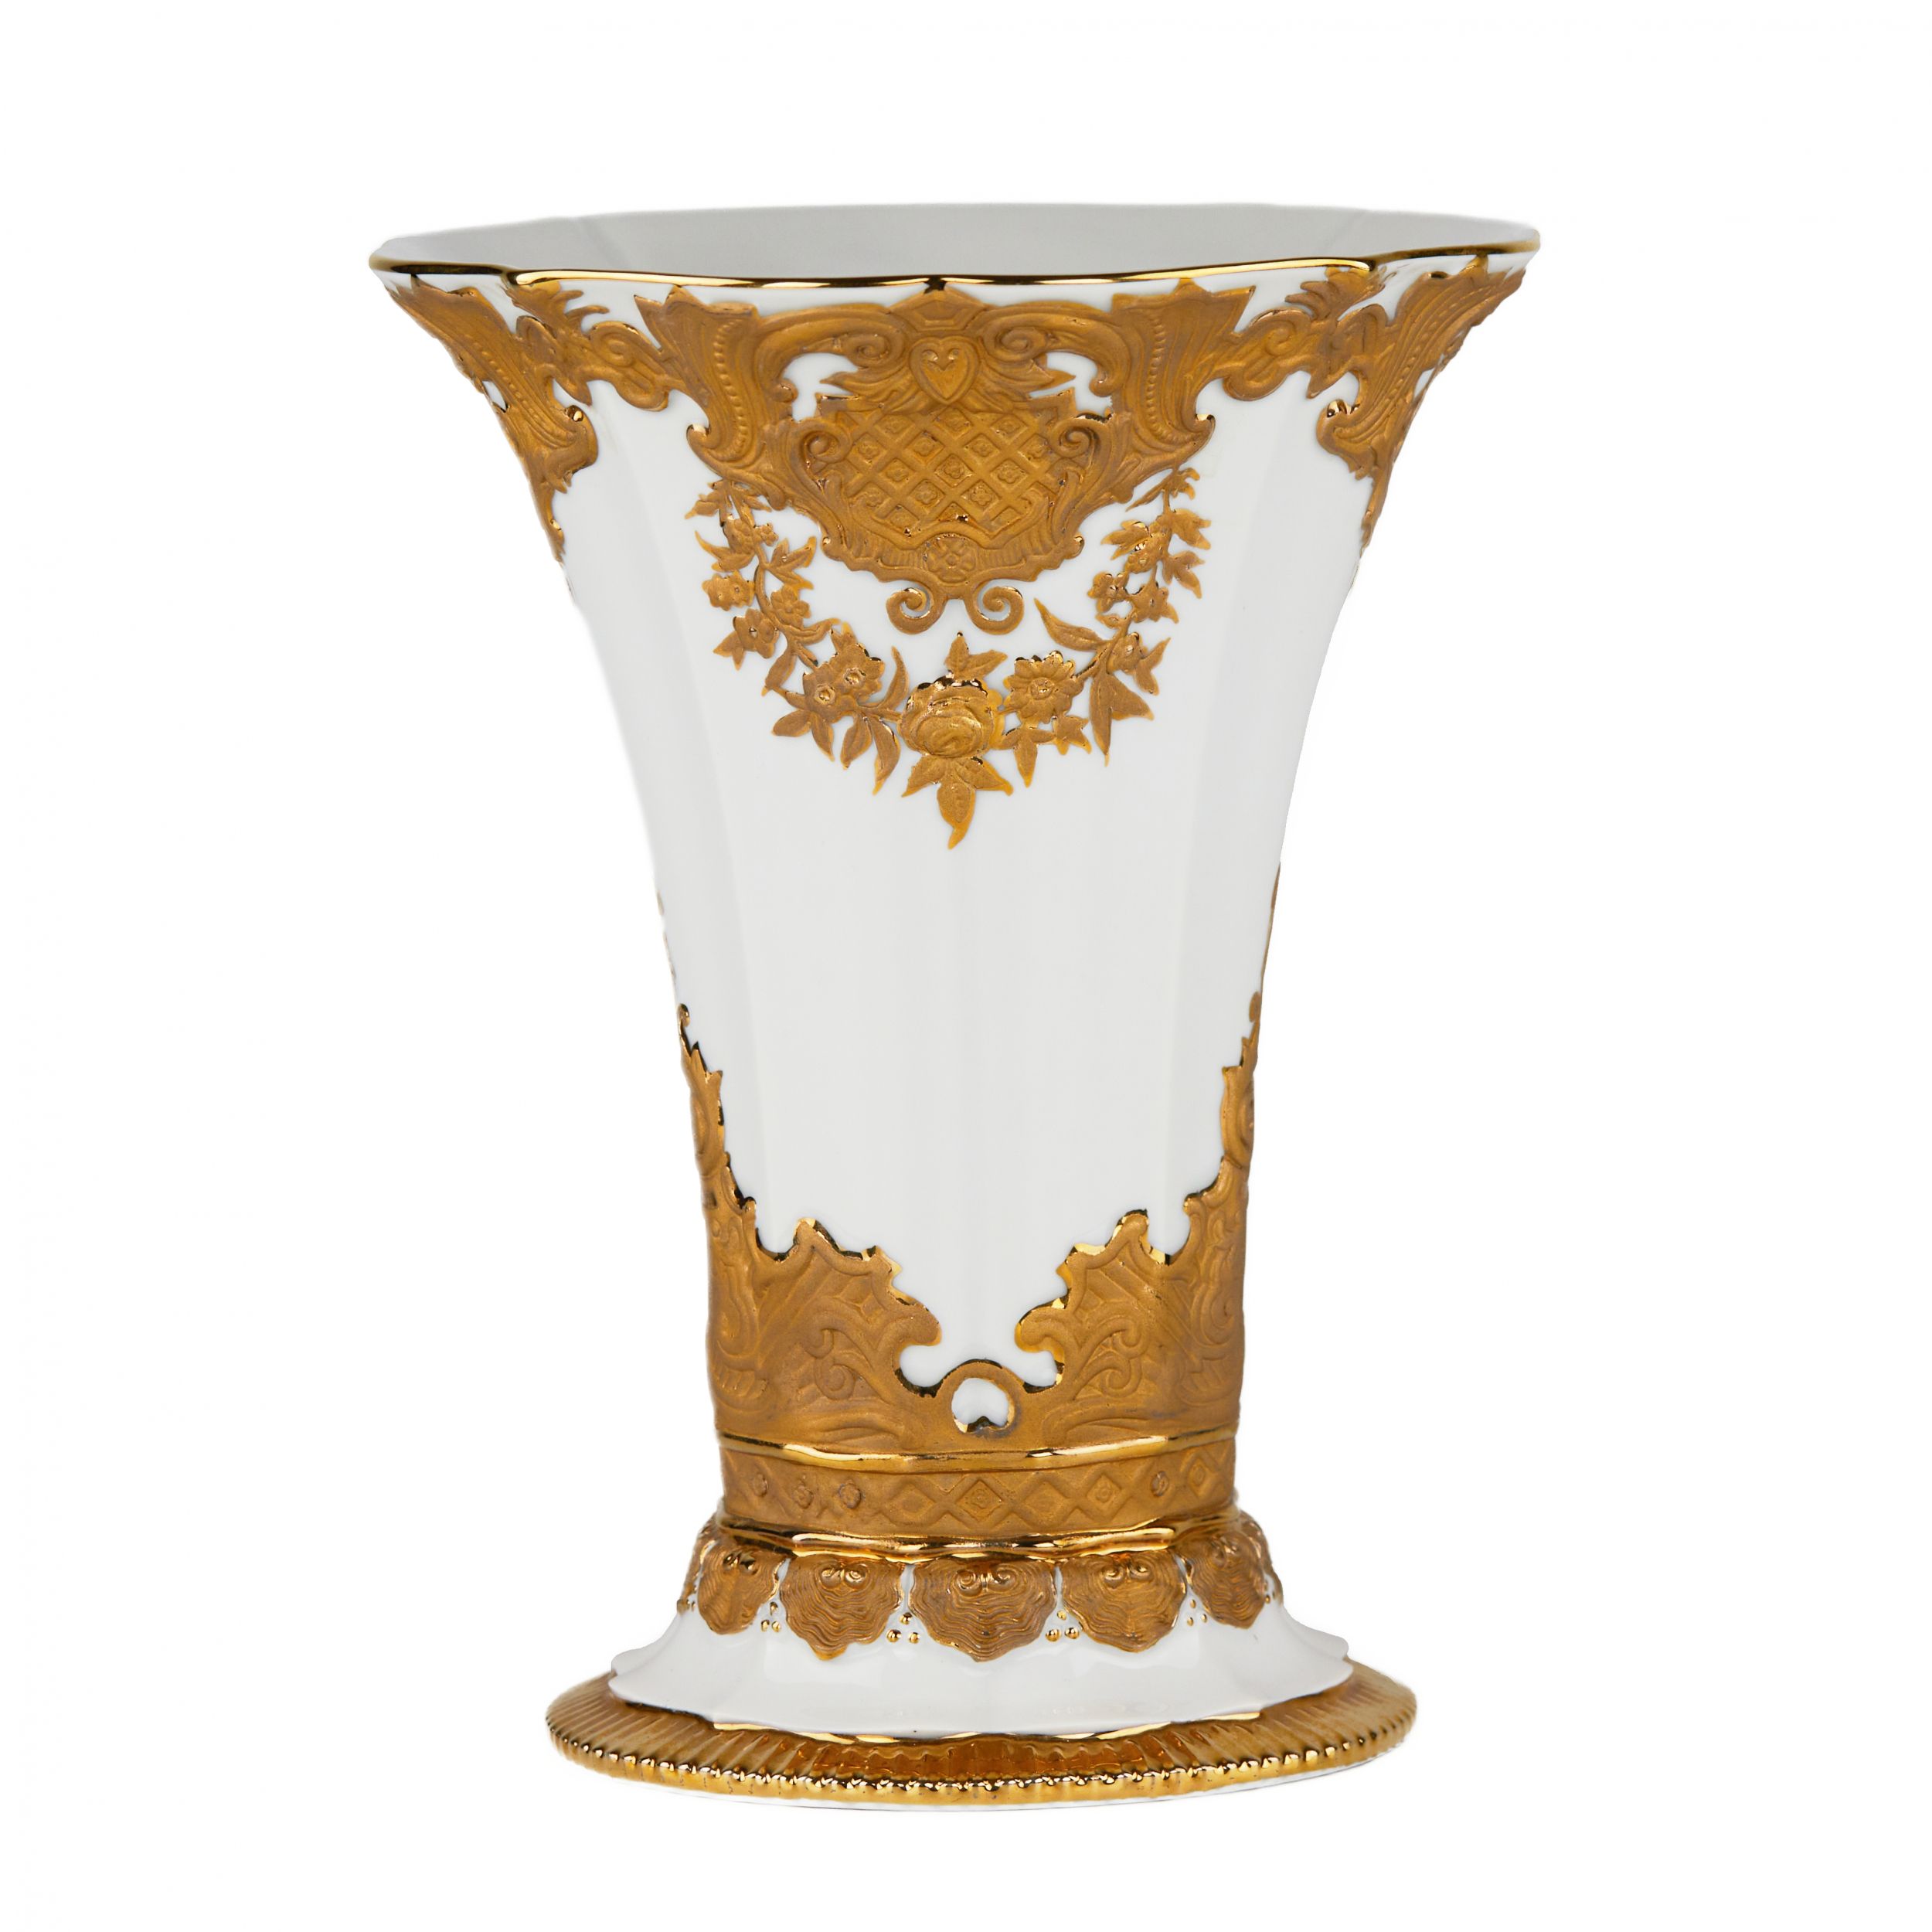 Magnificent-vase-with-golden-relief-Meissen-Turn-of-the-19th-and-20th-centuries-